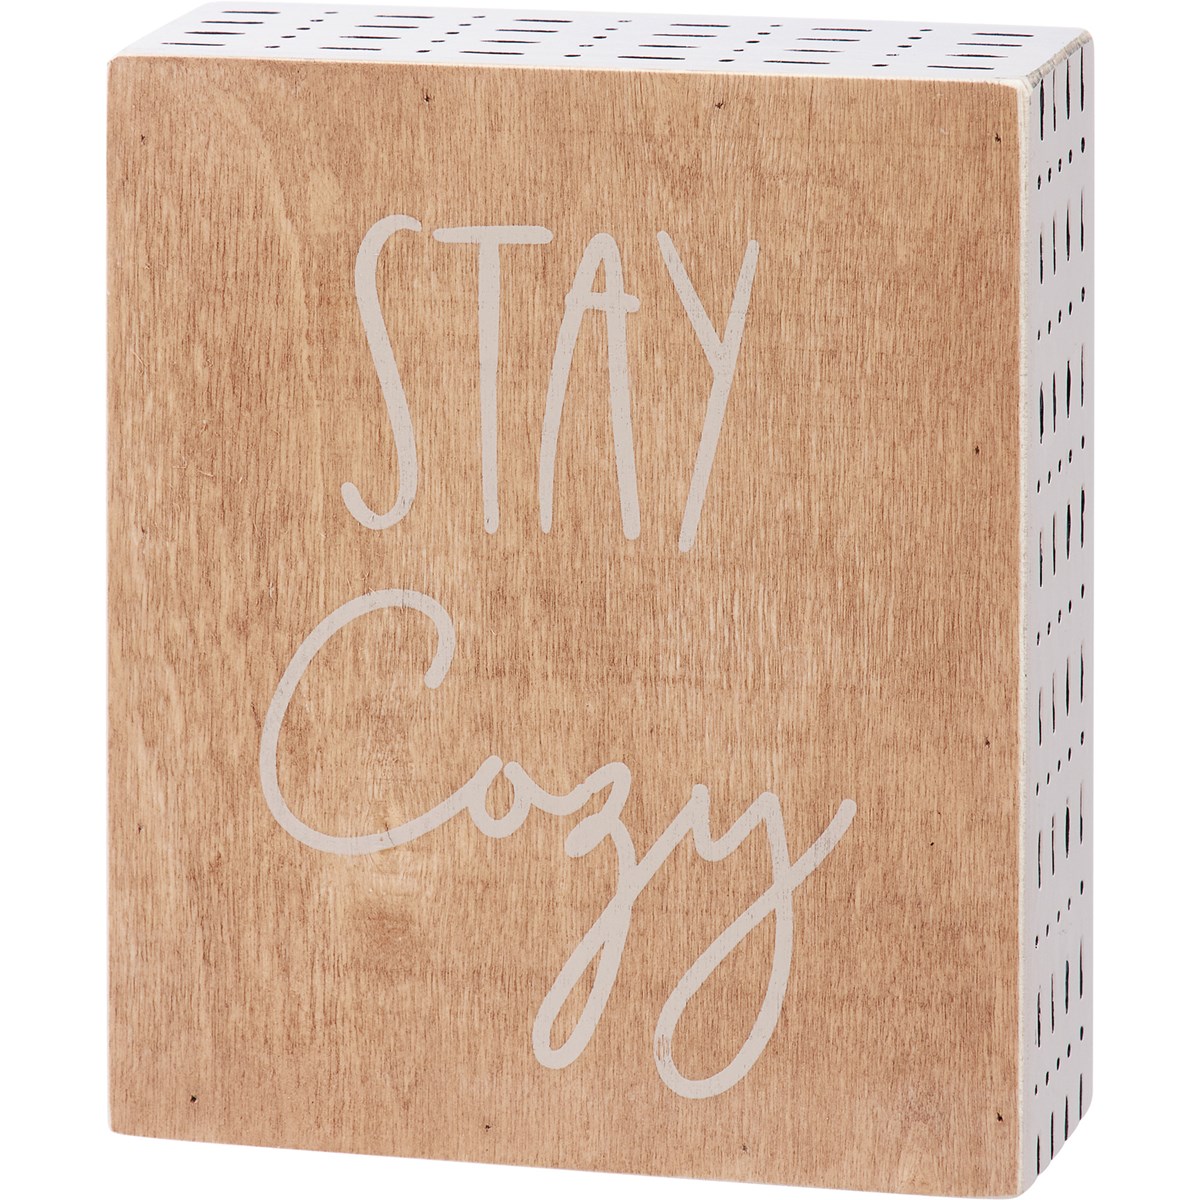 Stay Cozy Box Sign - Wood